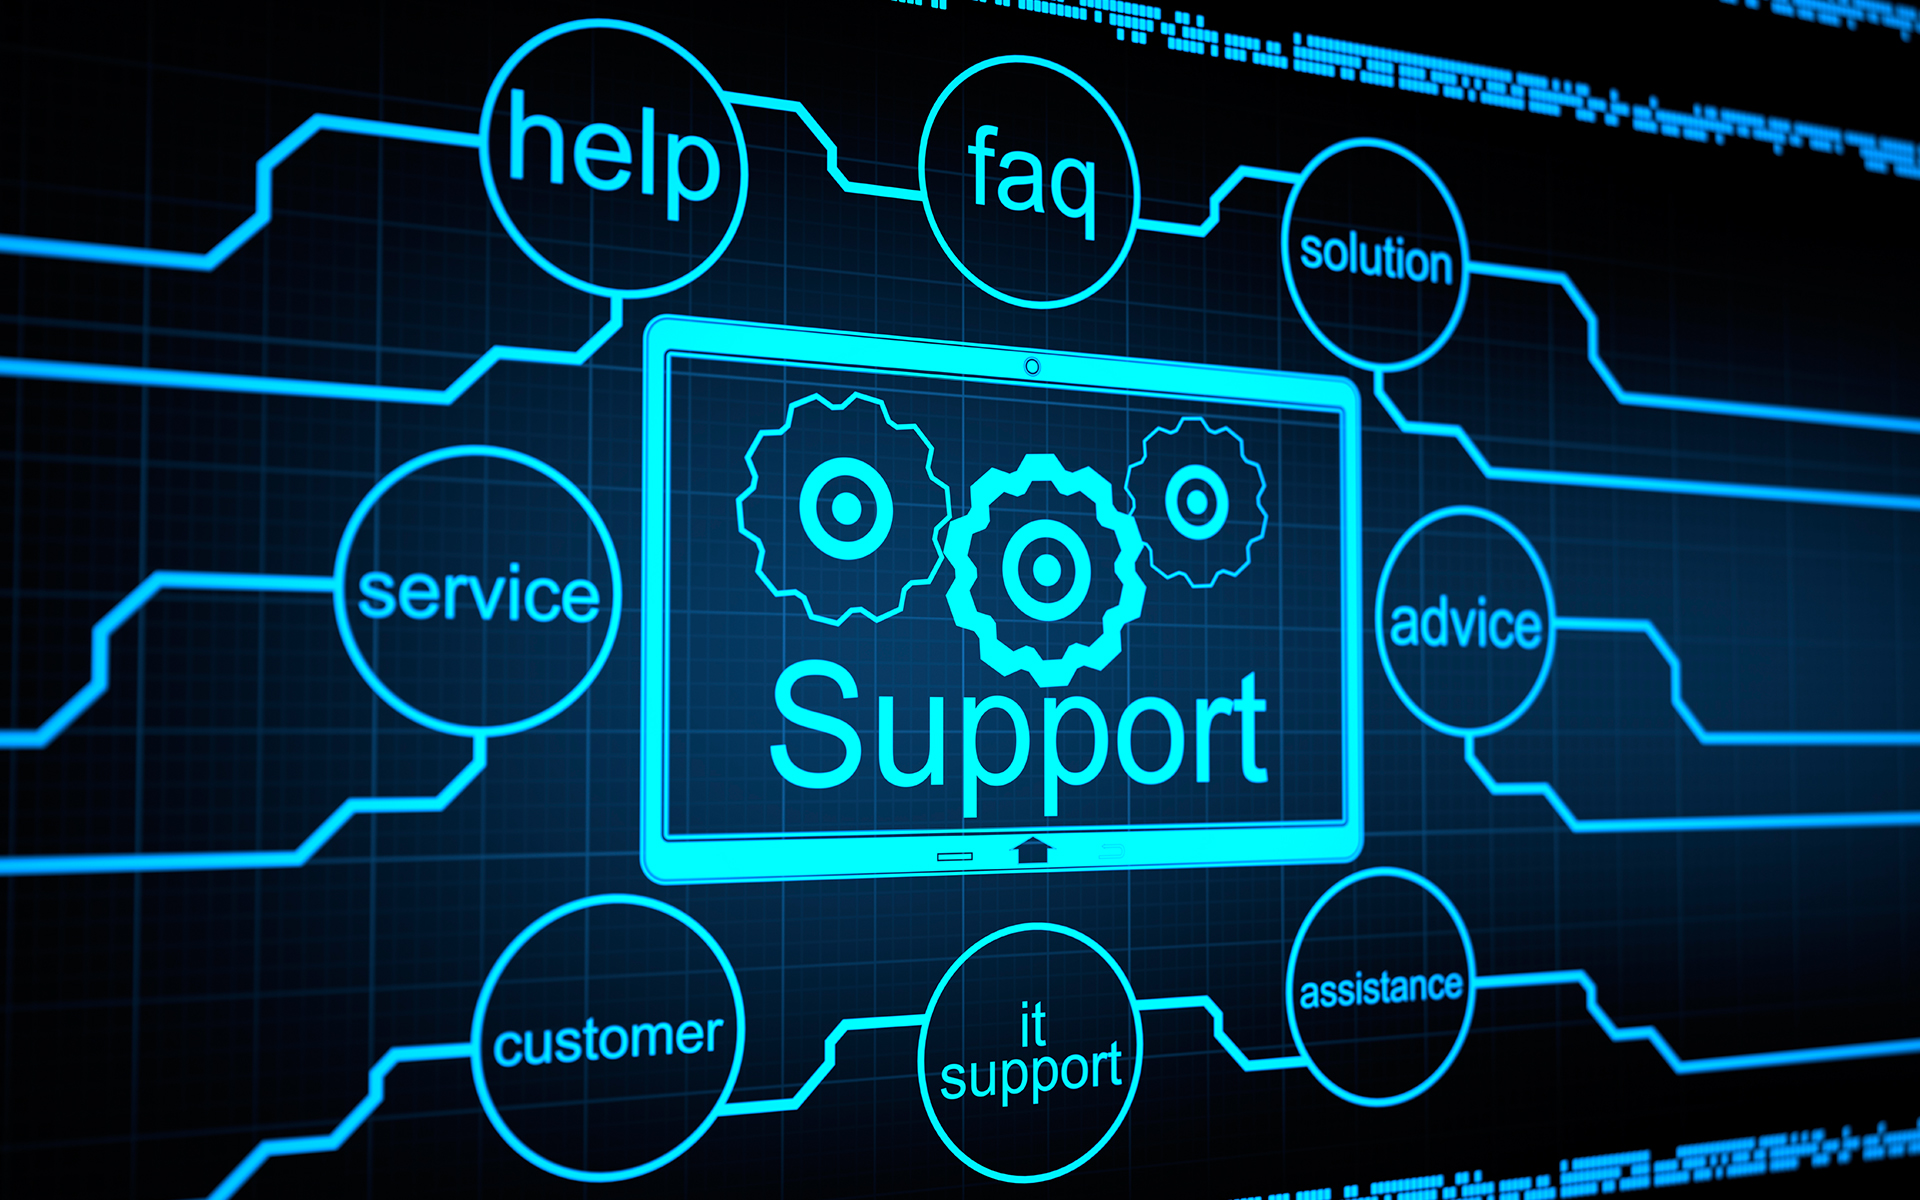 IT Support Wallpaper Free IT Support Background